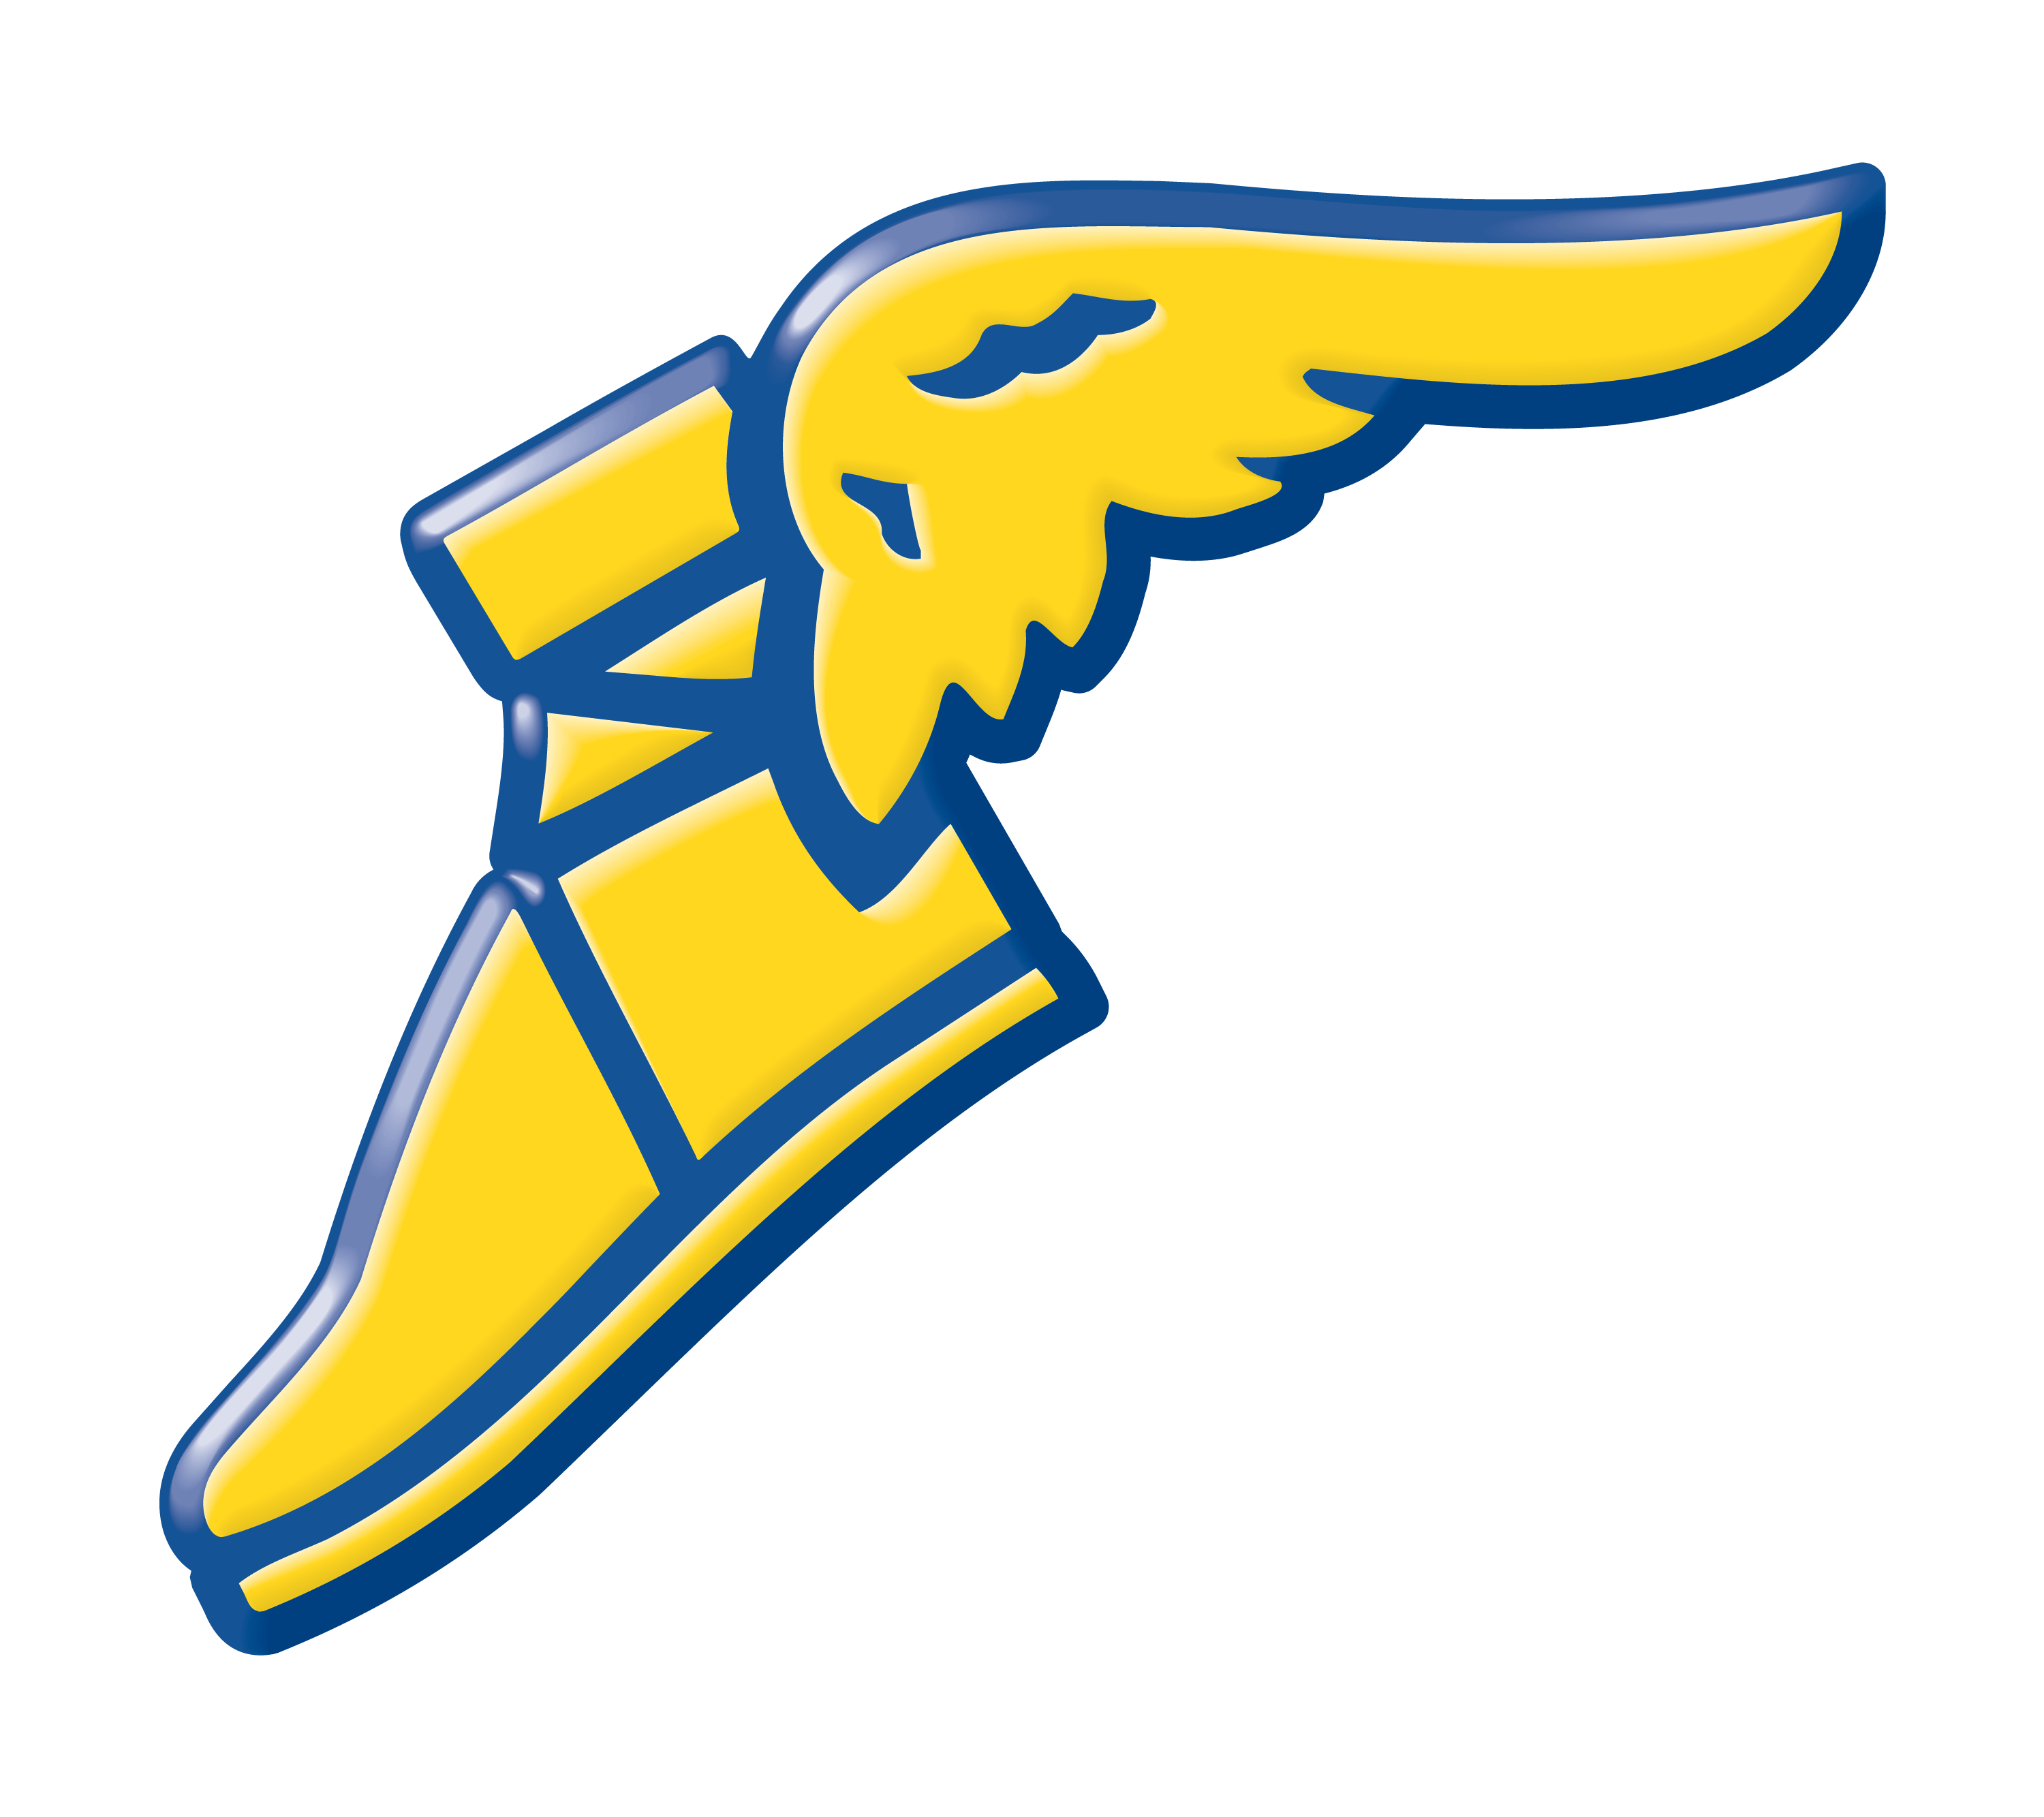 Yellow Shoe with Wing Logo - Shoe With Wings Logos | Free download best Shoe With Wings Logos on ...